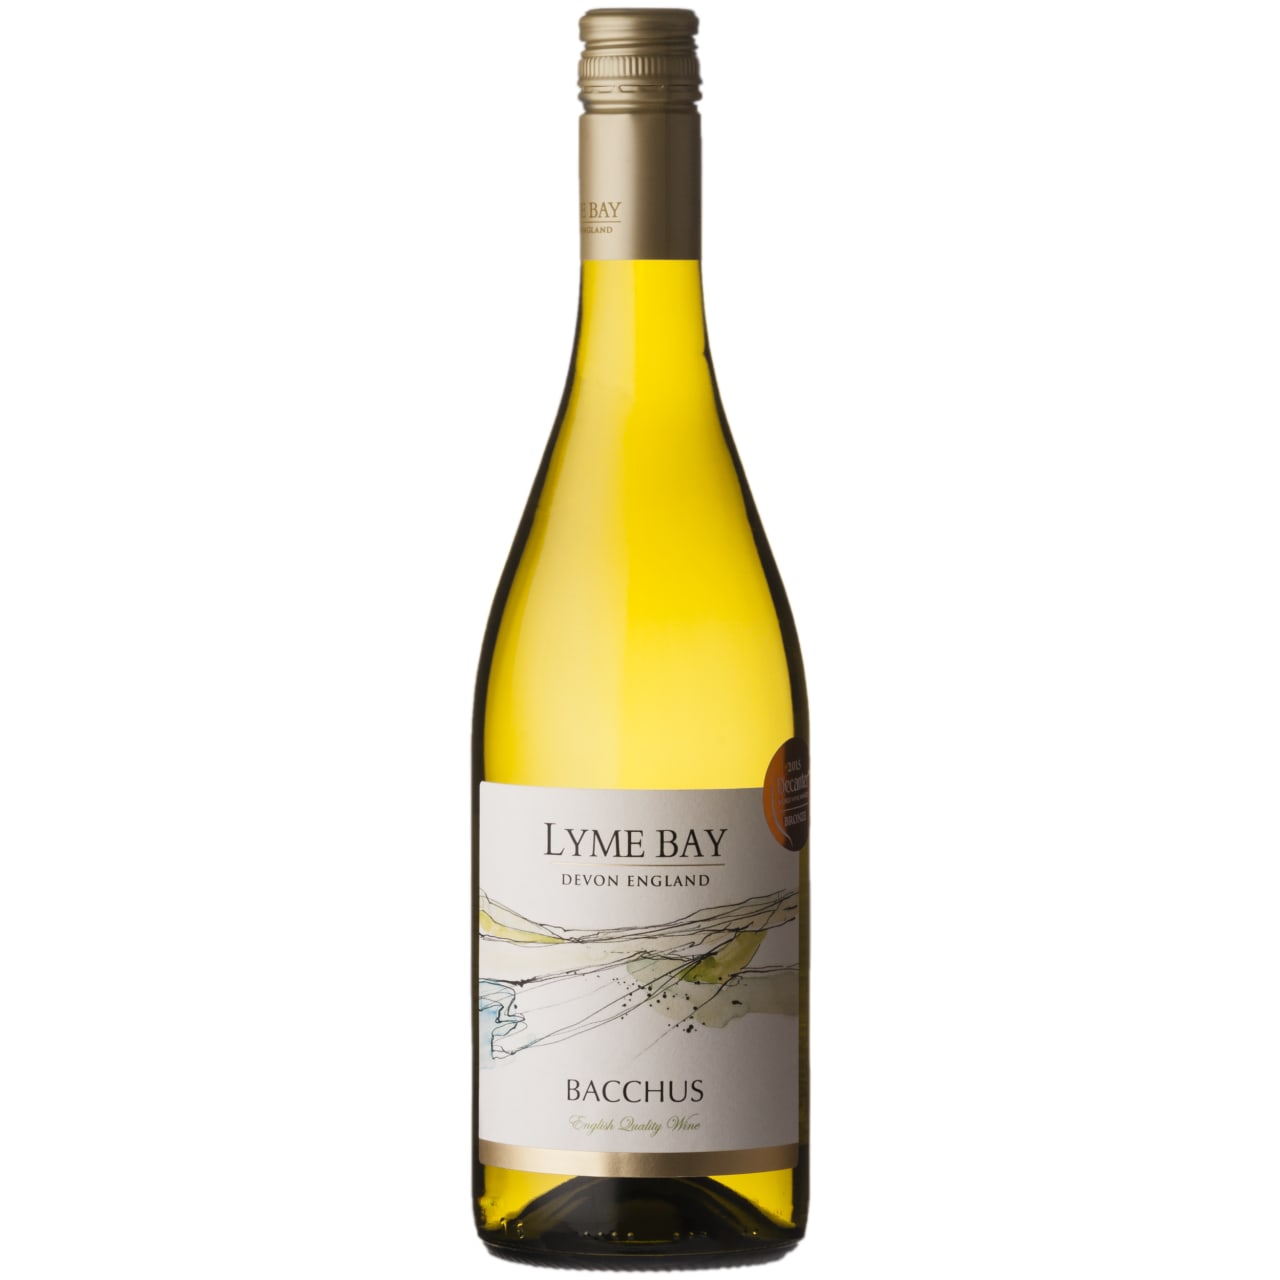 Thanks to England's cool maritime climate and long growing season, Lyme Bay's Bacchus shows fresh and bright acidity with a complex and pronounced delivery of grapefuit, cut-grass, elderflower and gooseberry flavours.